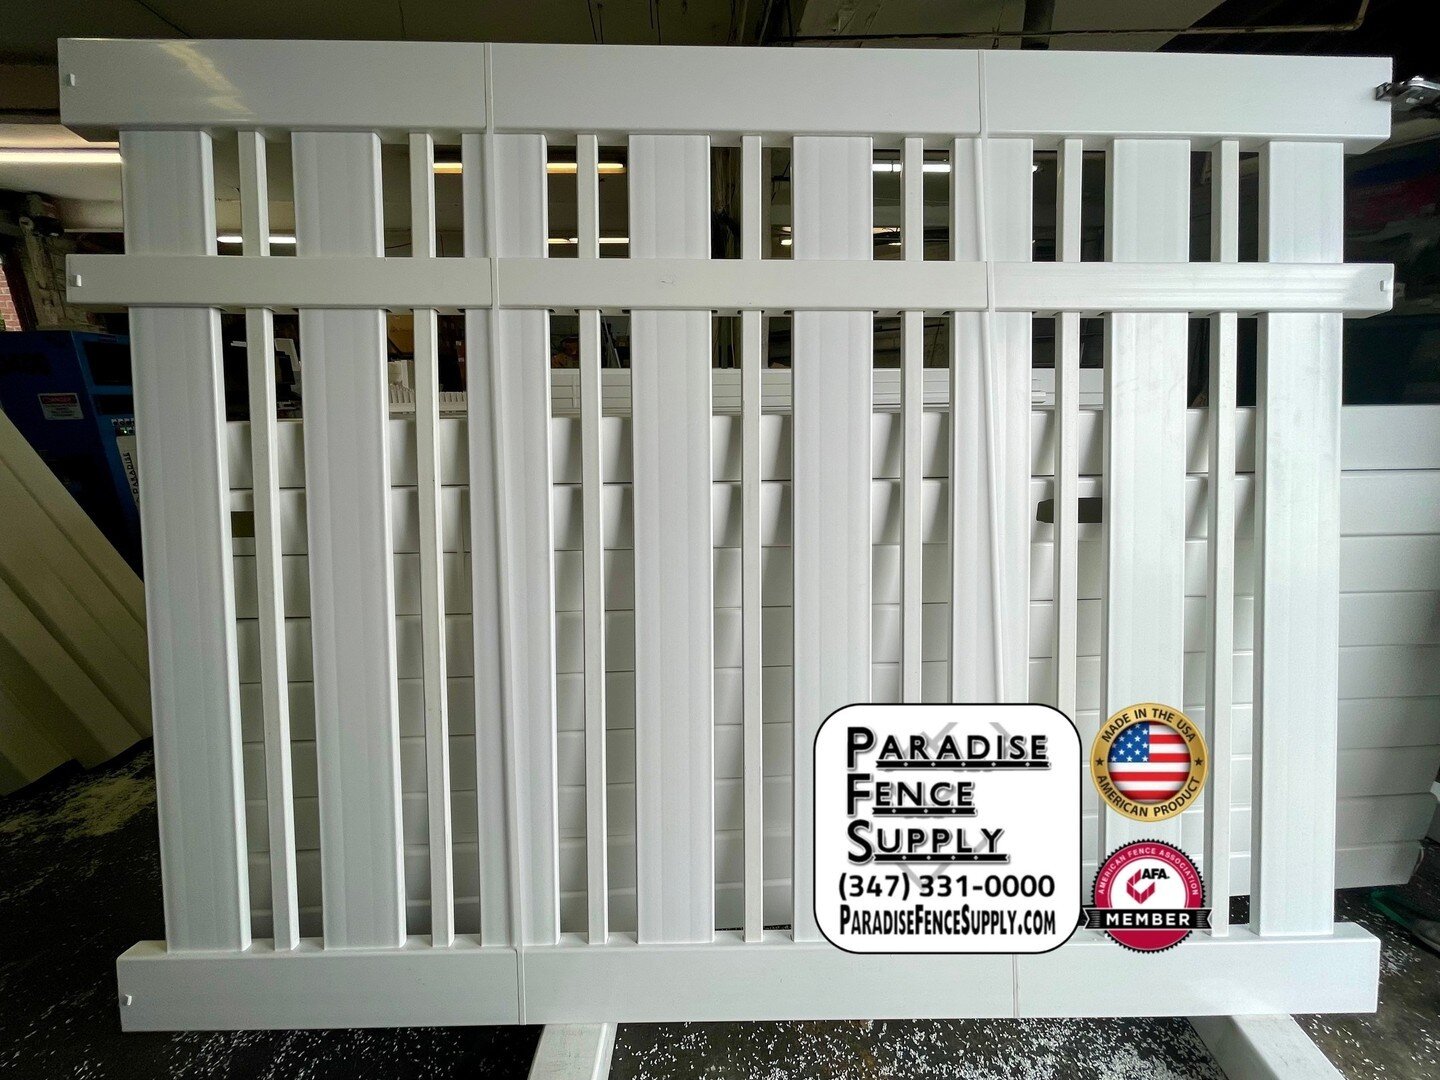 Custom PVC fence featuring alternating picket patterns. With our in-house fabrication shop, we can custom design a picket pattern for you. Contact us today to create your unique style PVC fence. (347) 331-0000 ParadiseFenceSupply.com #PVCFence #Custo